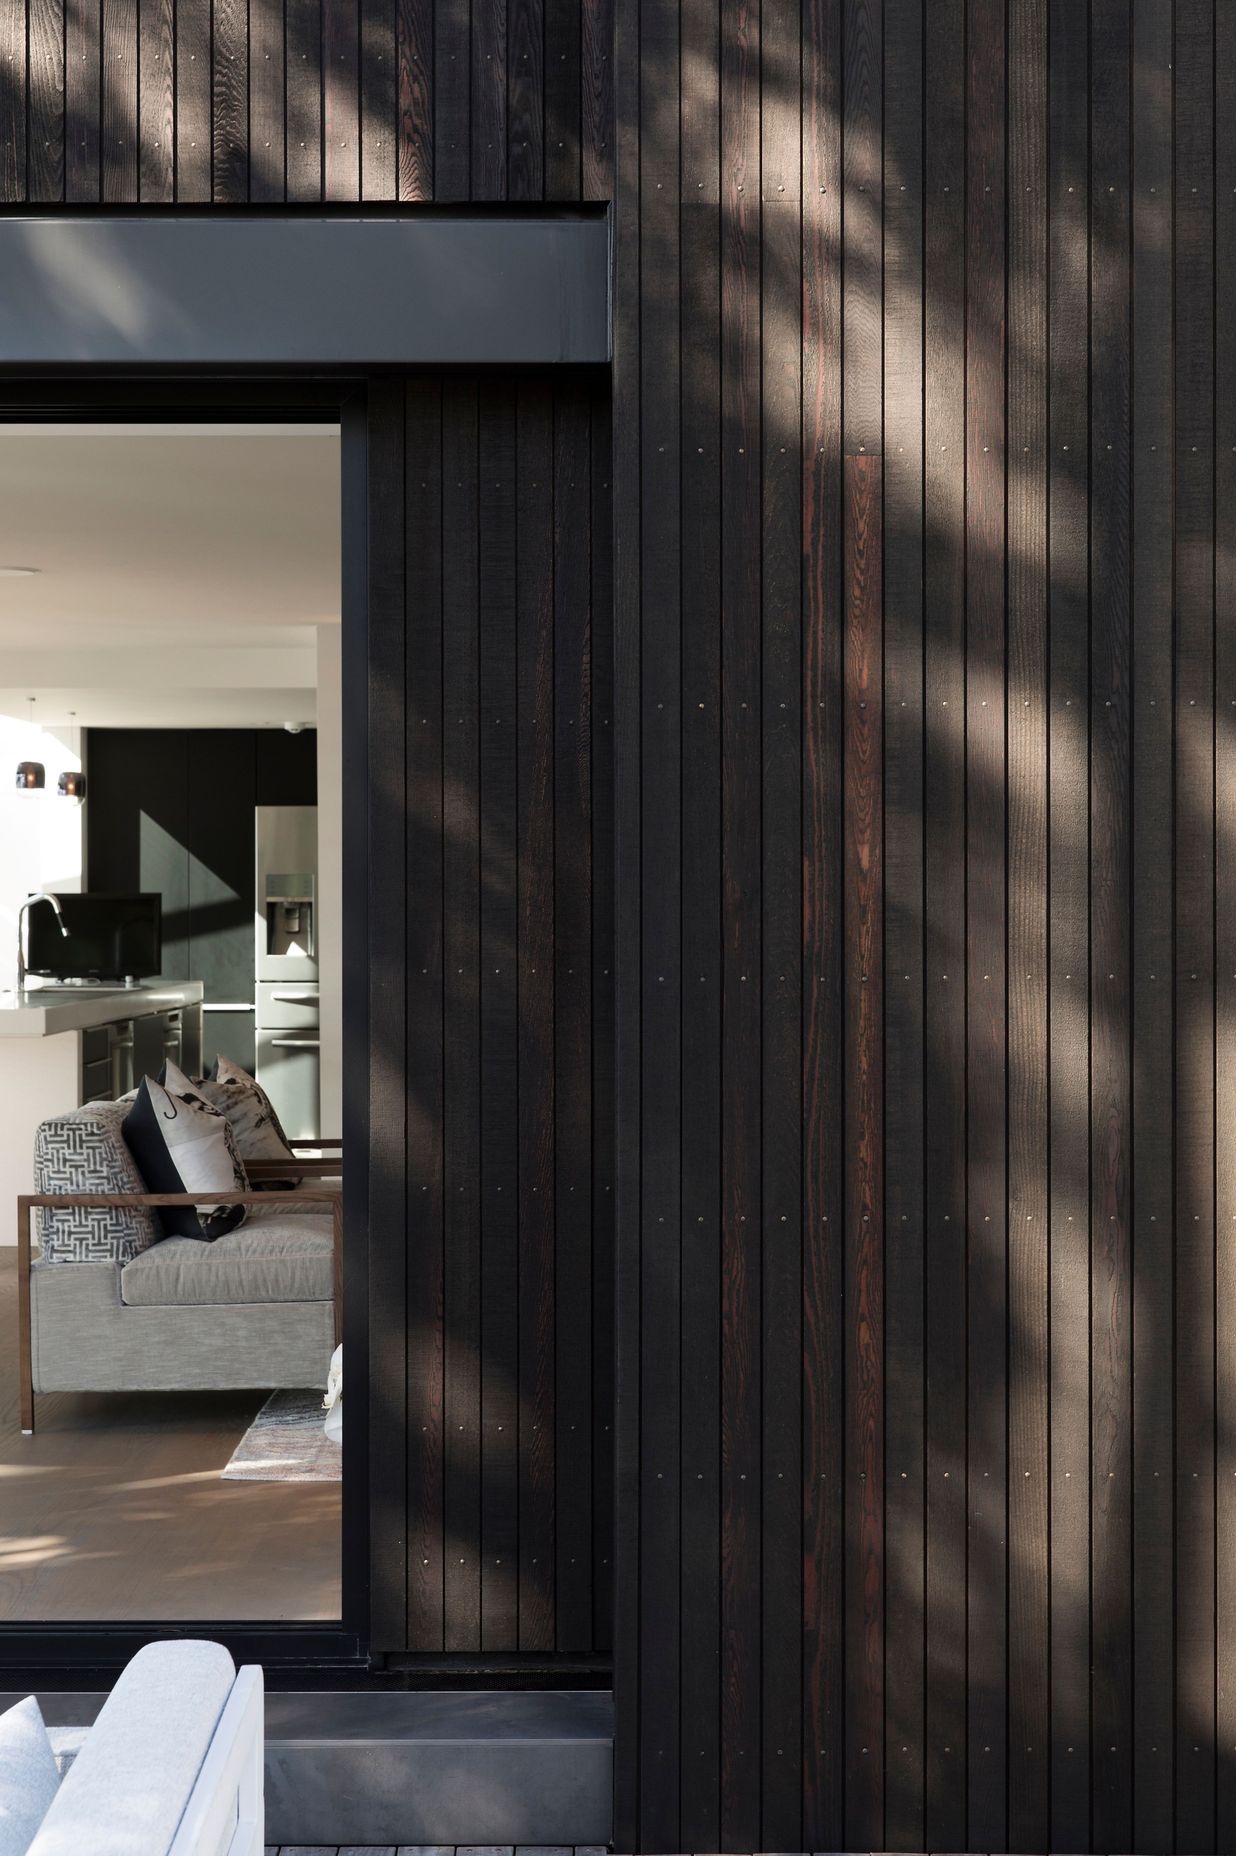 Narrow boards of black-stained cedar cladding create a pinstriped effect.